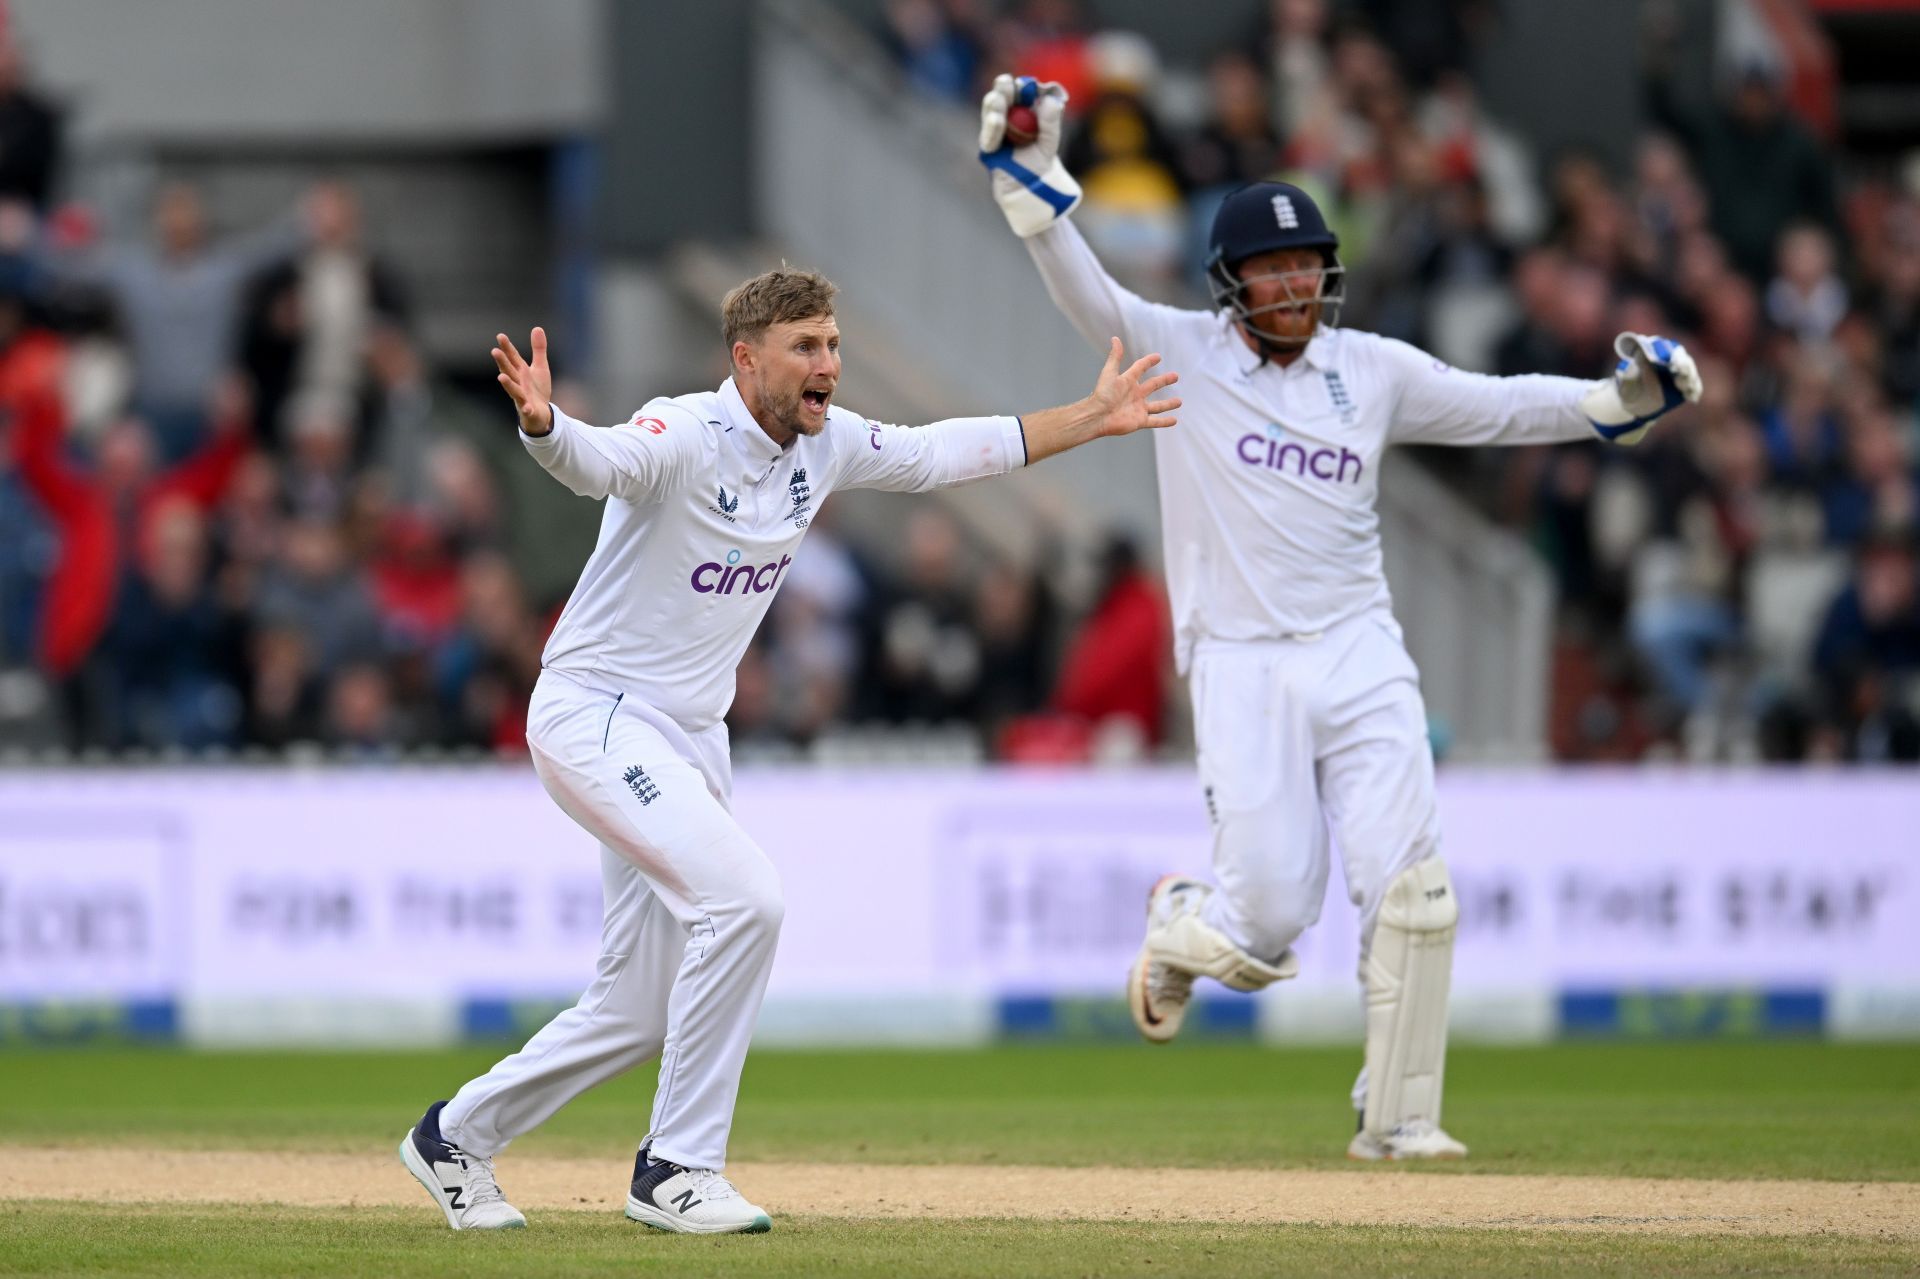 Joe Root and Jonny Bairstow appeal for the wicket. (Credits: Getty)